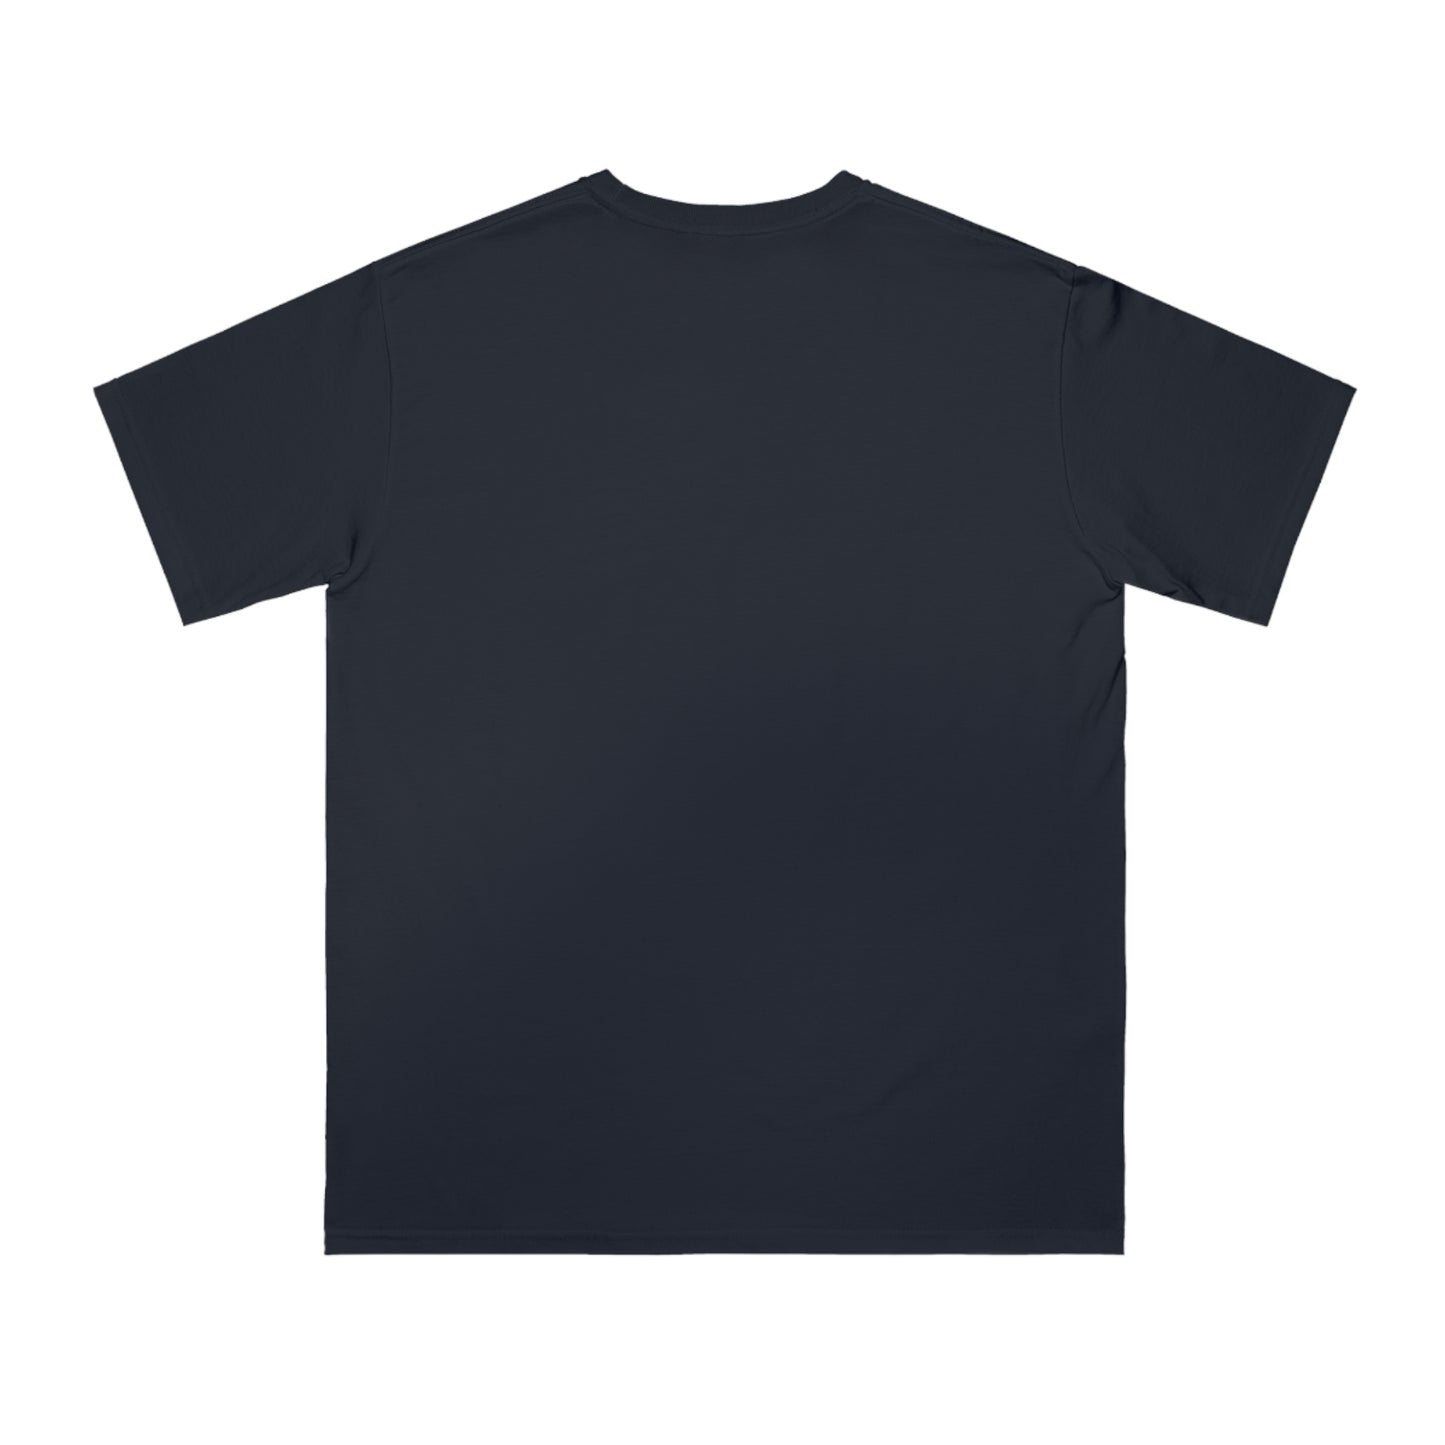 a black t - shirt with a white background